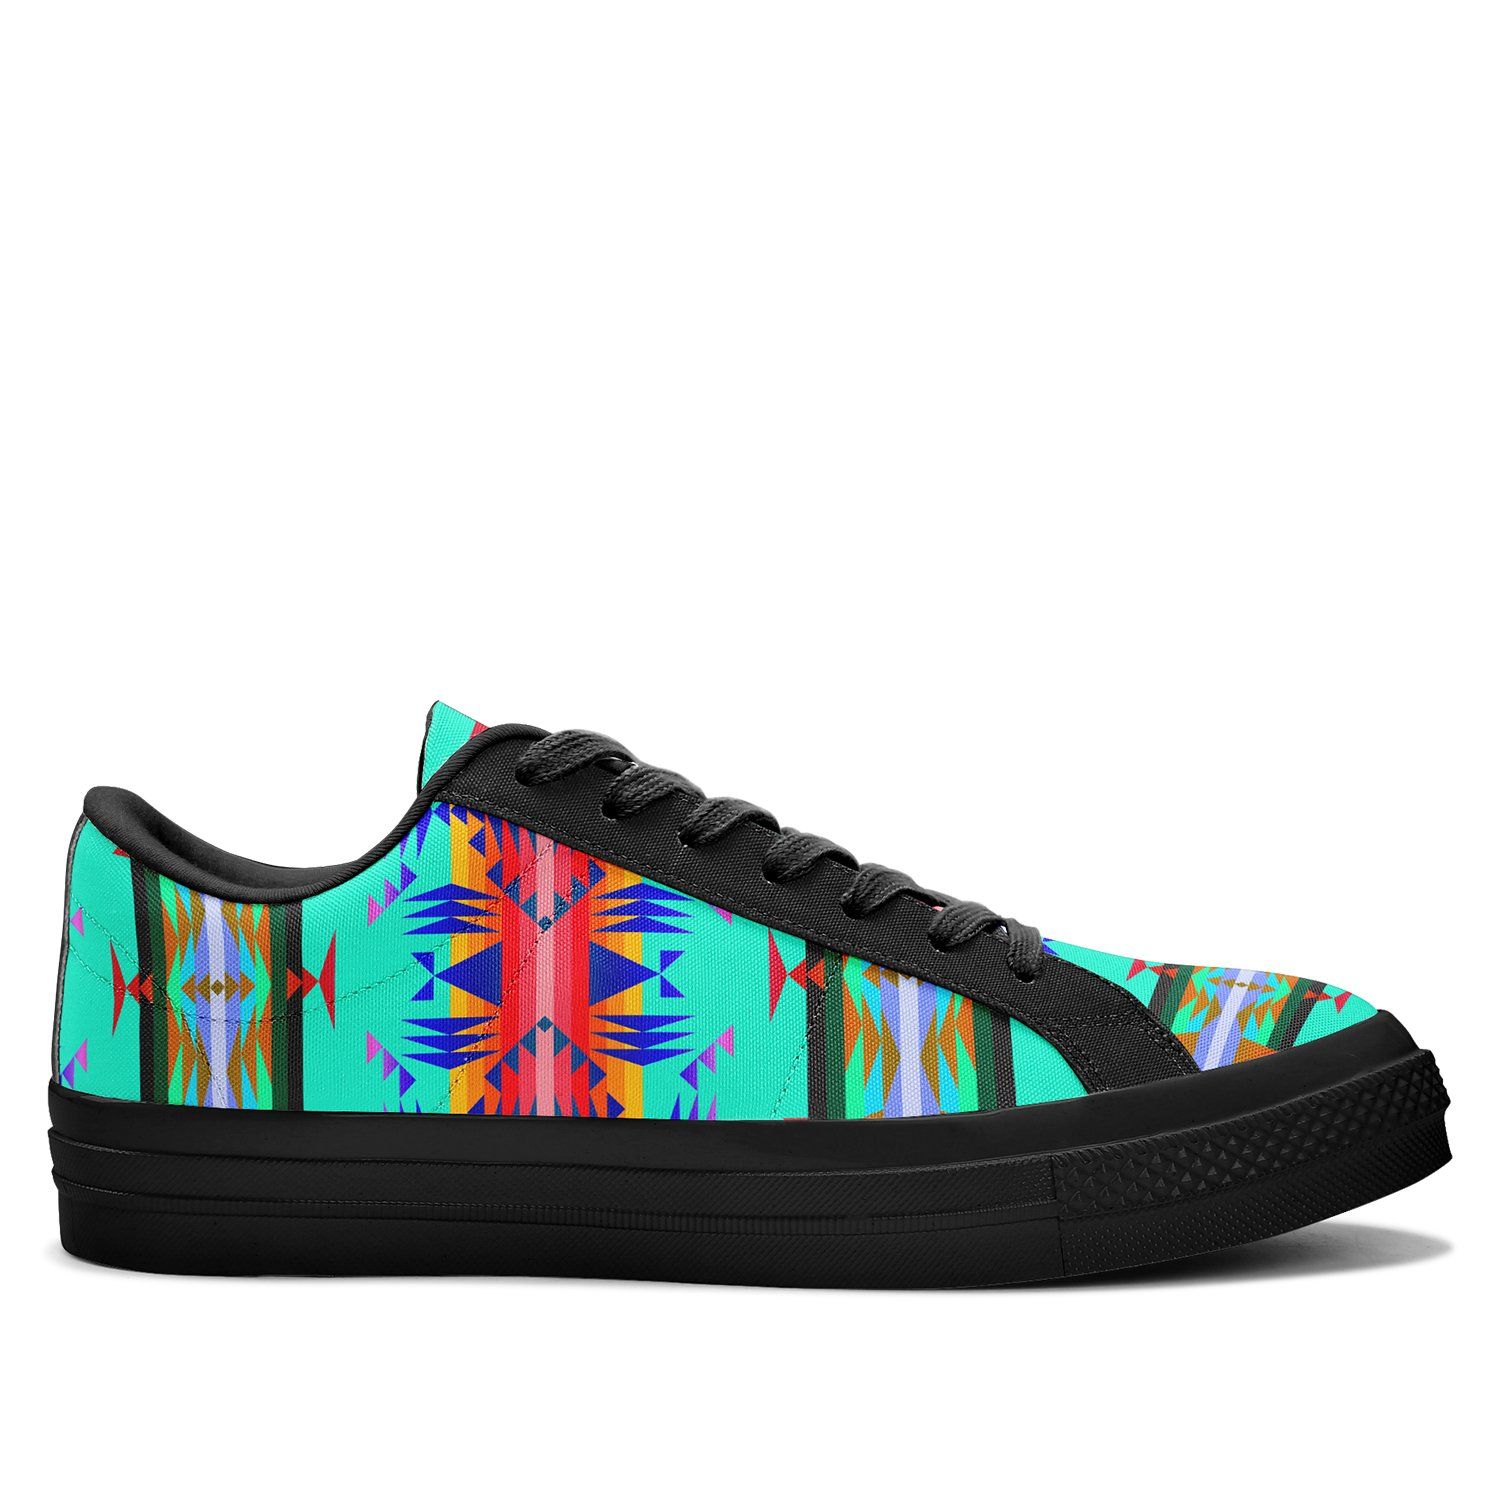 Between the Mountains Spring Aapisi Low Top Canvas Shoes Black Sole 49 Dzine 